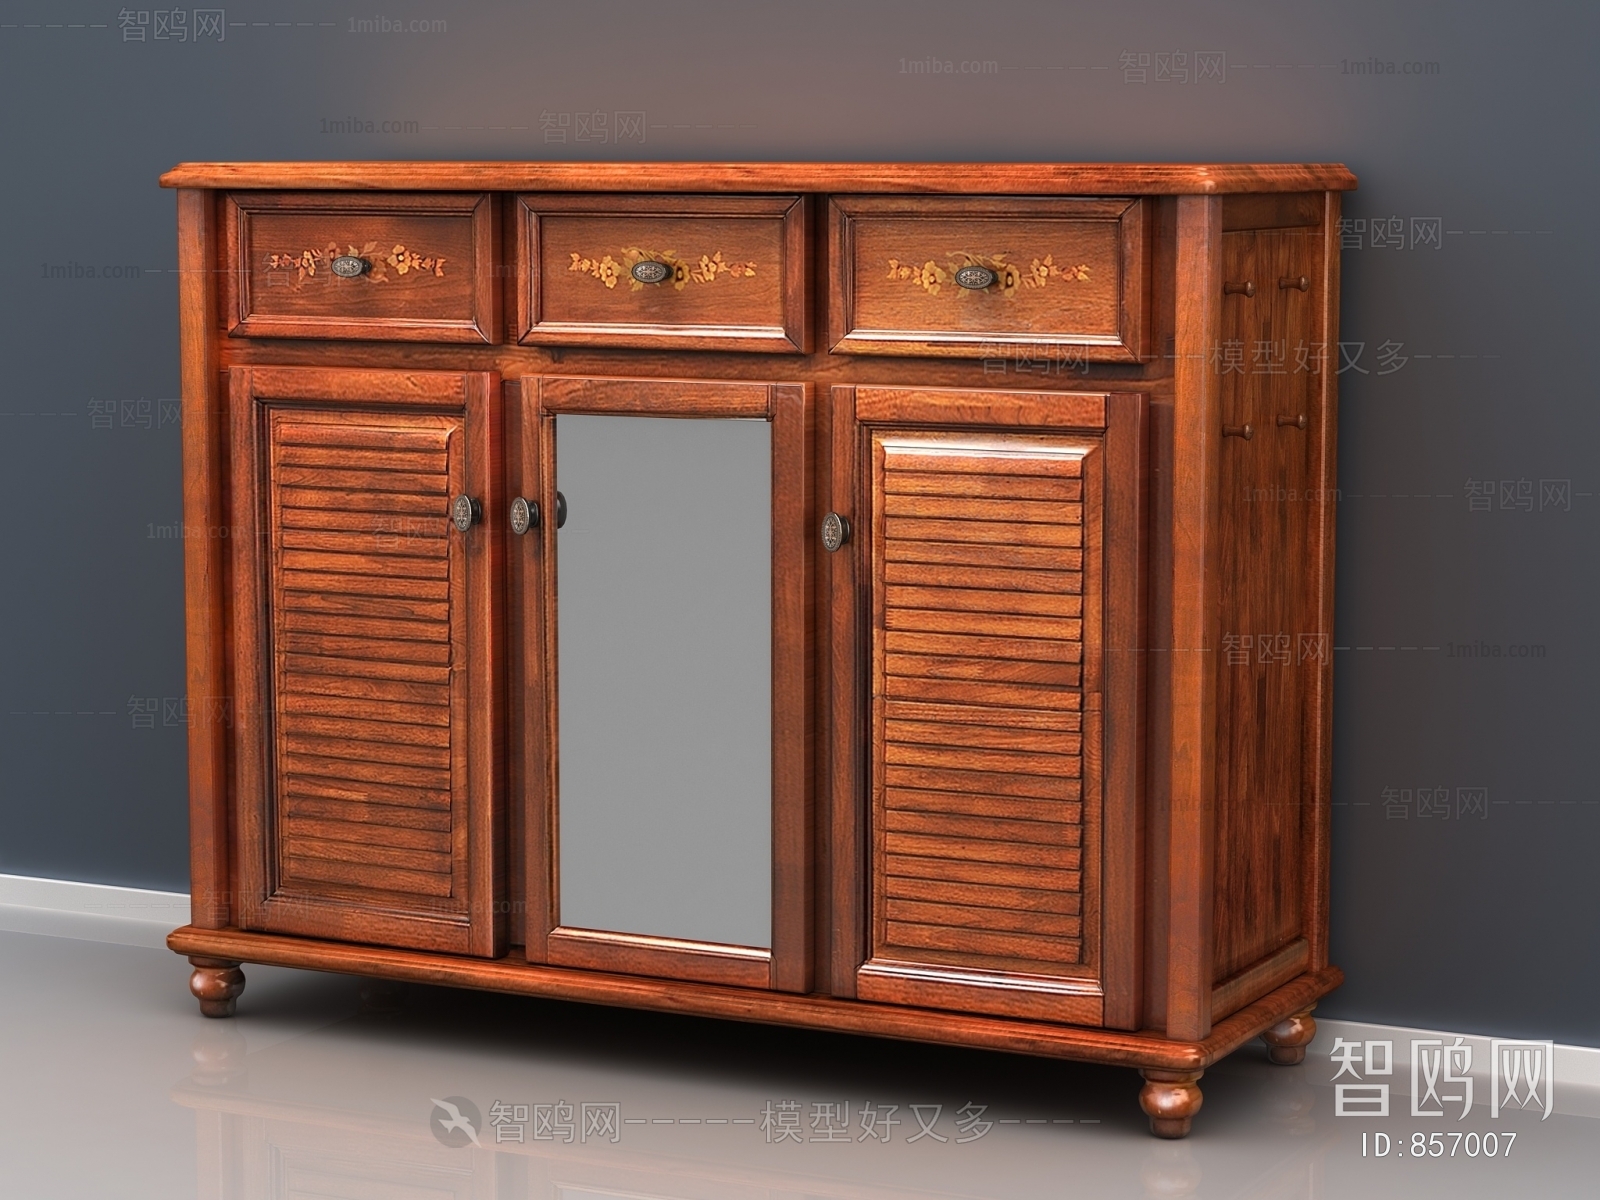 New Classical Style Shoe Cabinet